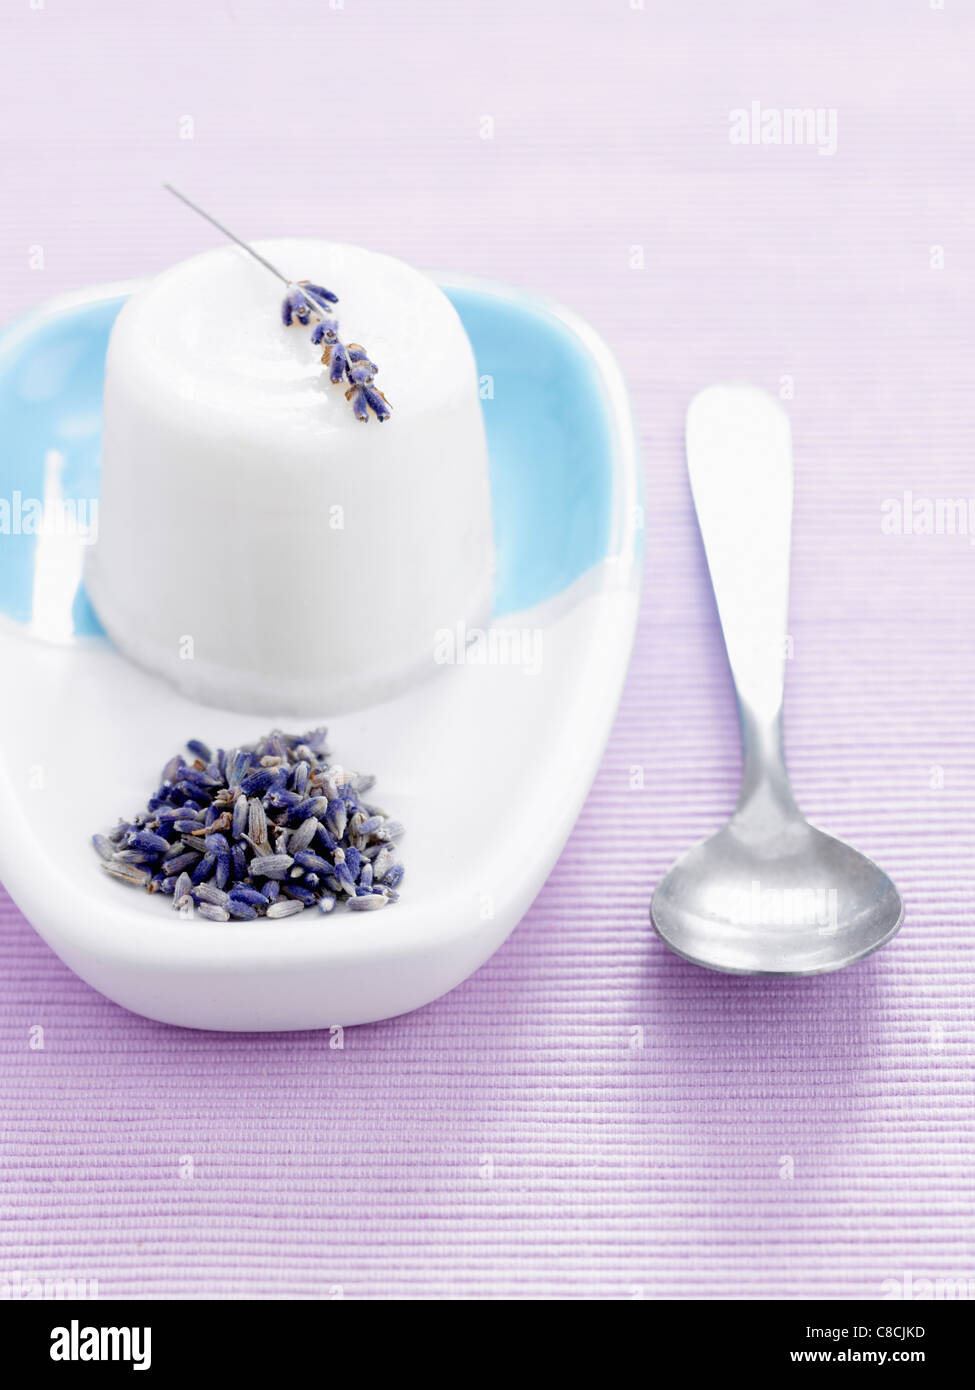 Calming flan with lavander essential oils Stock Photo